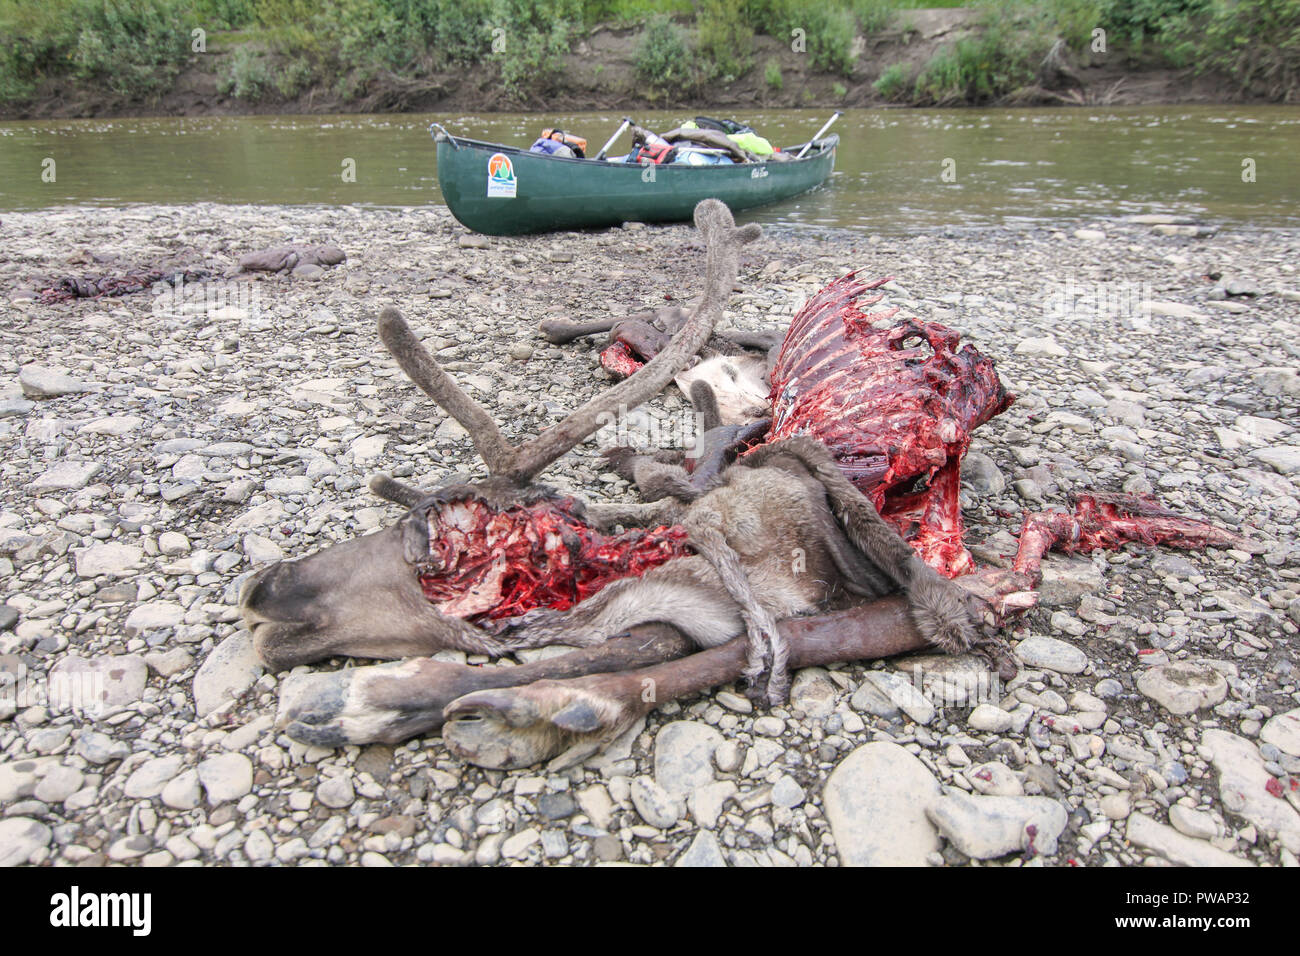 Yukon river, Yukon Territory, Alaska. Caribou dead lying on the ground after being attacked and eaten by artic wolfs and expedition canoe behind. Stock Photo